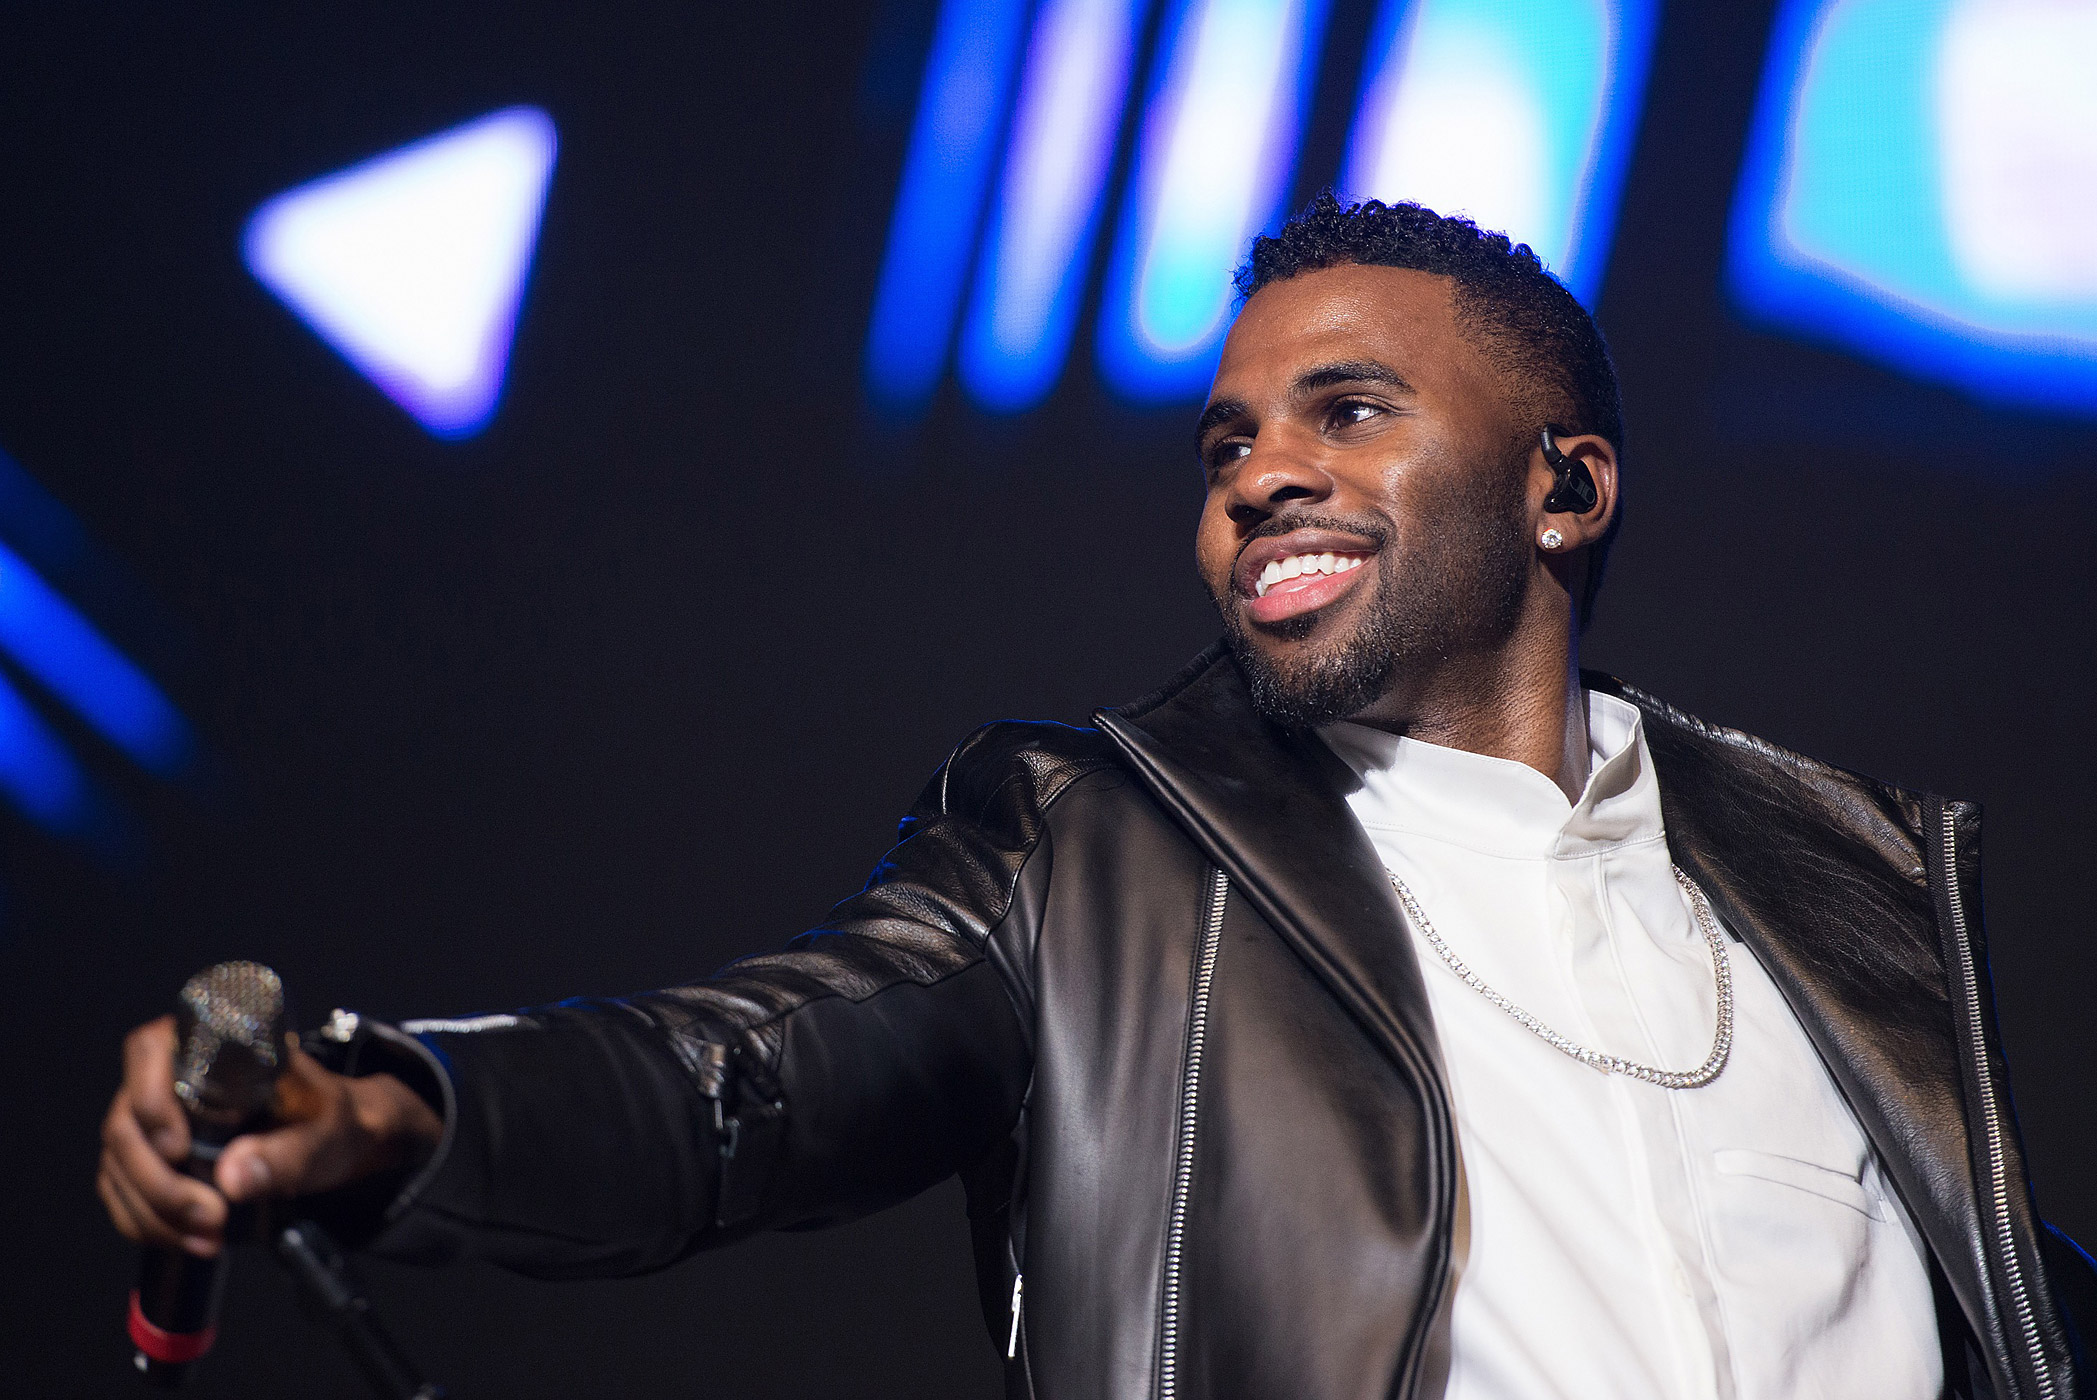 Jason Derulo performs during KTU's KTUphoria 2015 at the Nikon at Jones Beach Theater on May 31, 2015 in Wantagh, NY. (Mike Pont—FilmMagic/Getty Images)